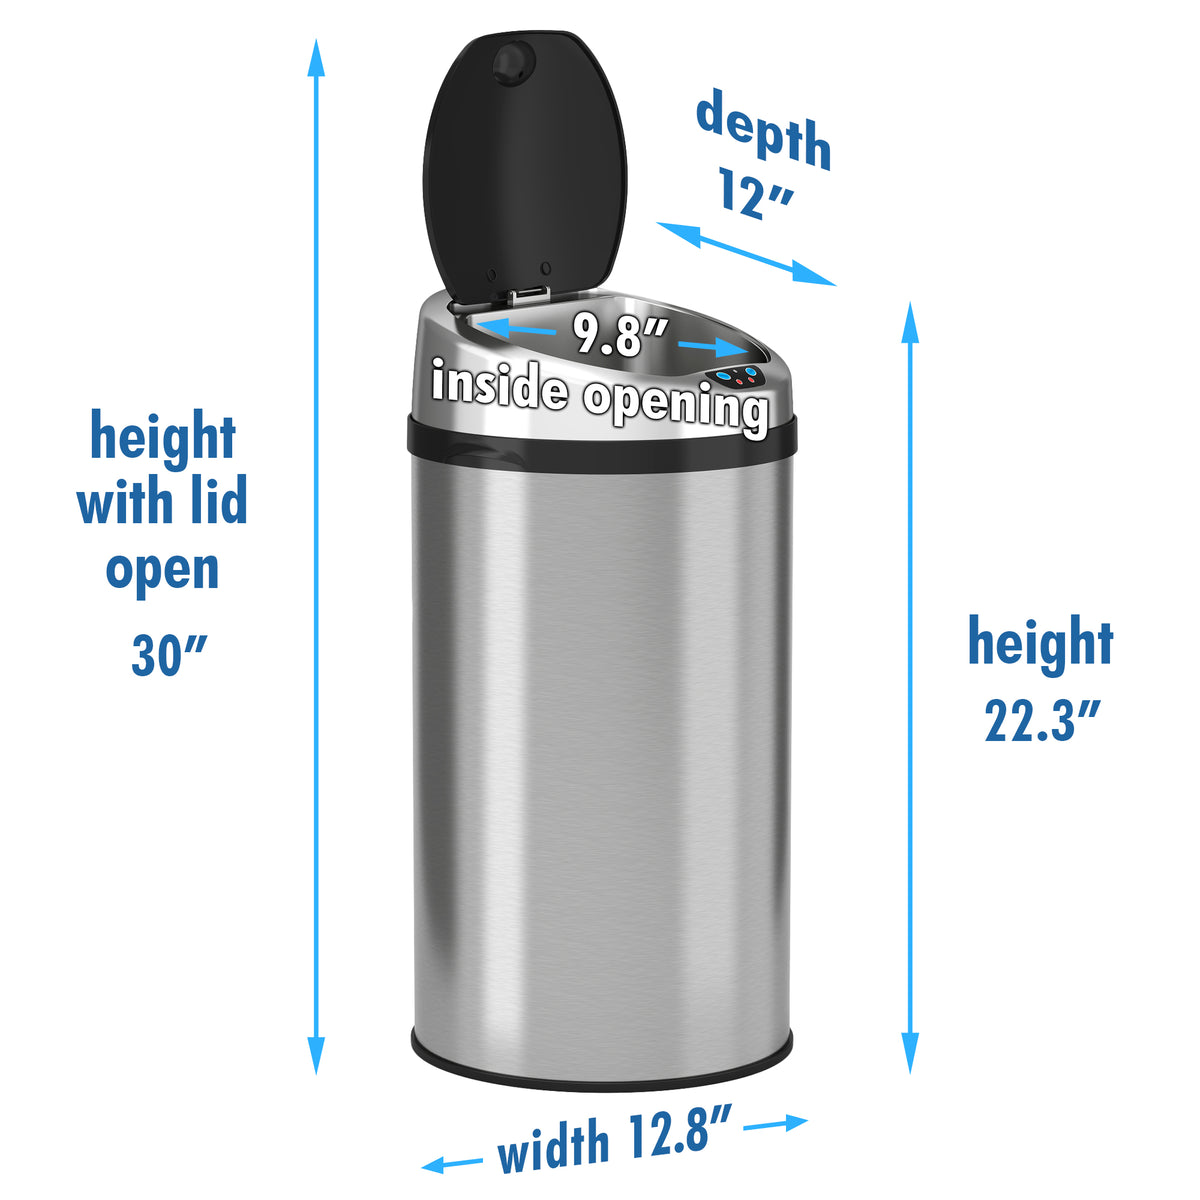 iTouchless 8 Gallon Stainless Steel Sensor Trash Can with Odor Filter dimensions